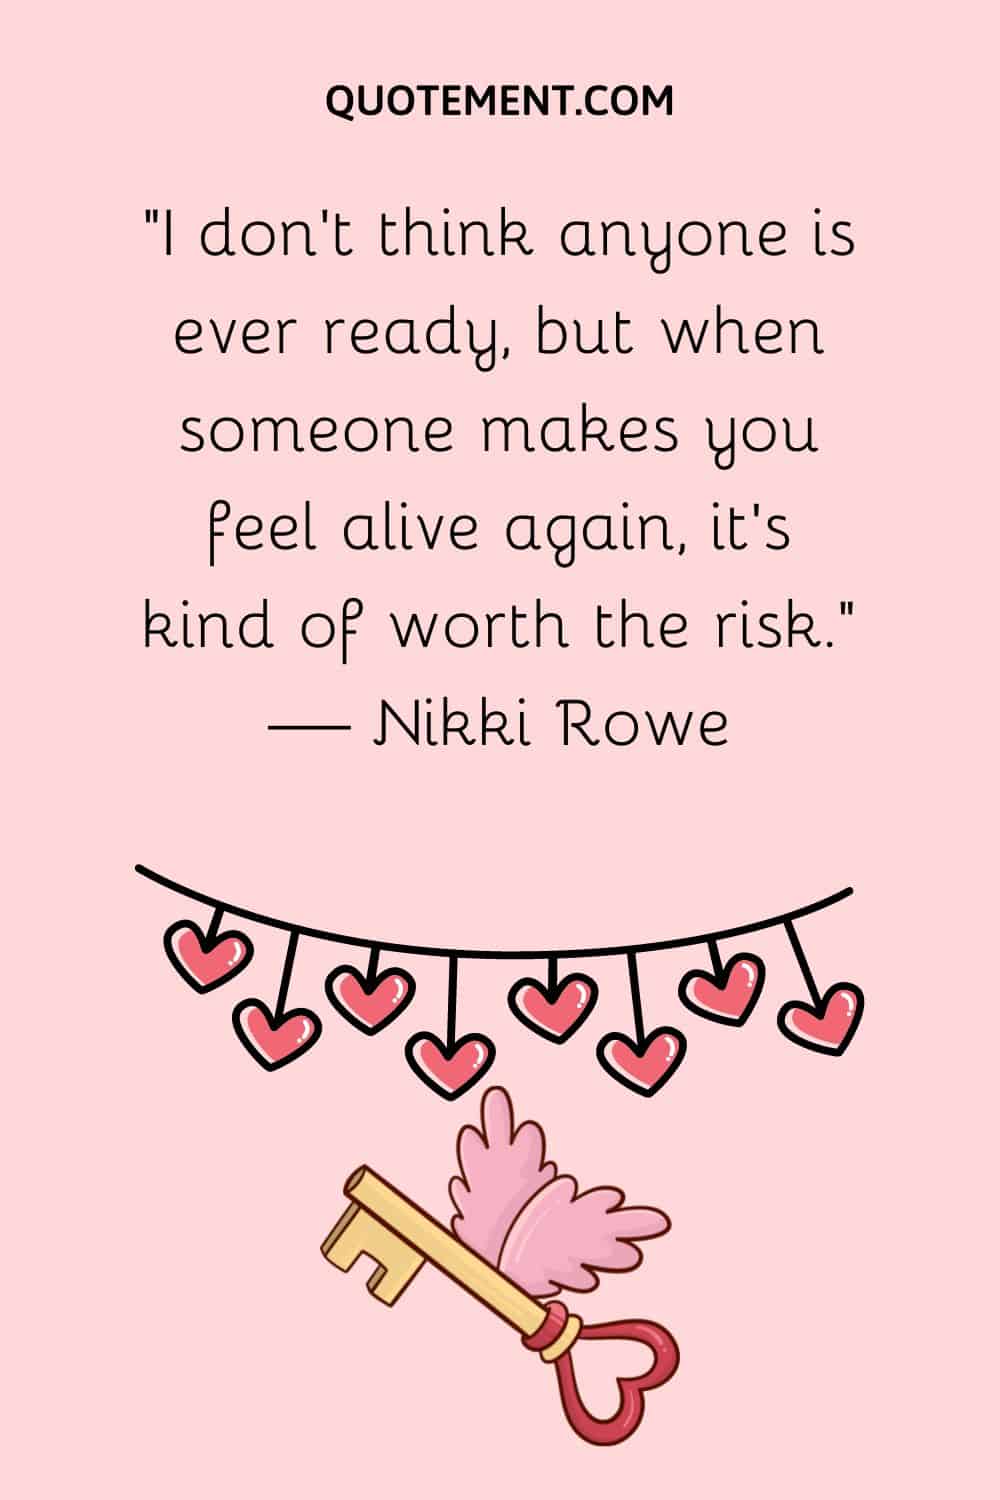 “I don’t think anyone is ever ready, but when someone makes you feel alive again, it’s kind of worth the risk.” — Nikki Rowe